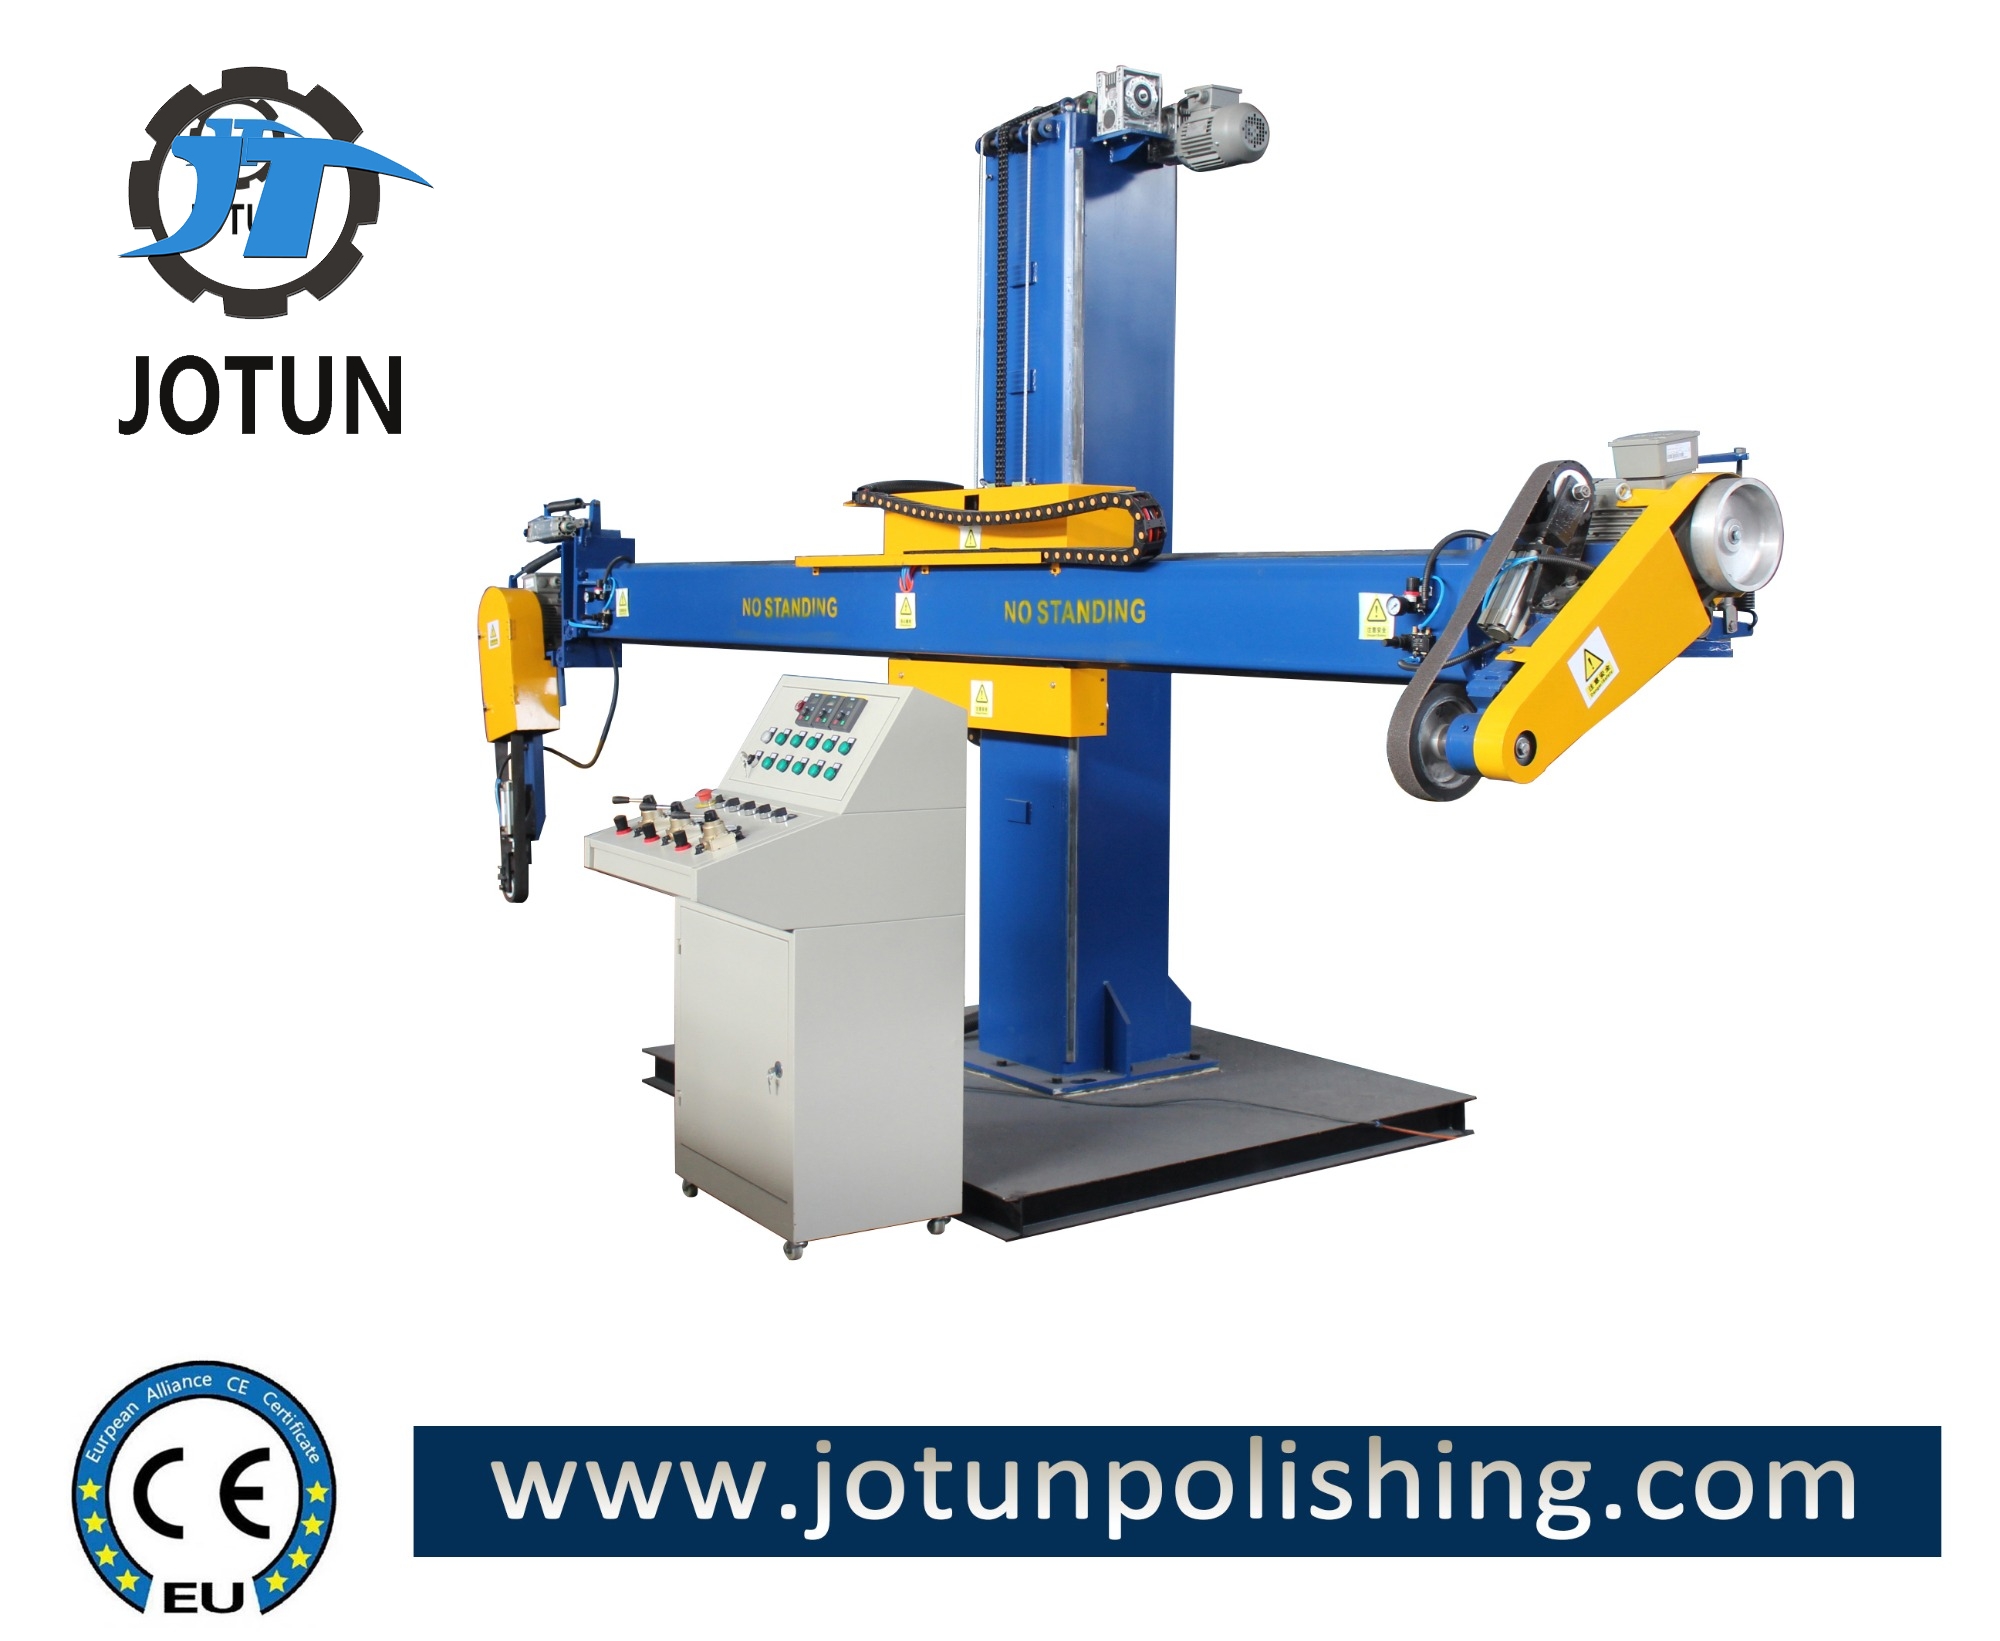 Metal shell polishing machine for stainless steel